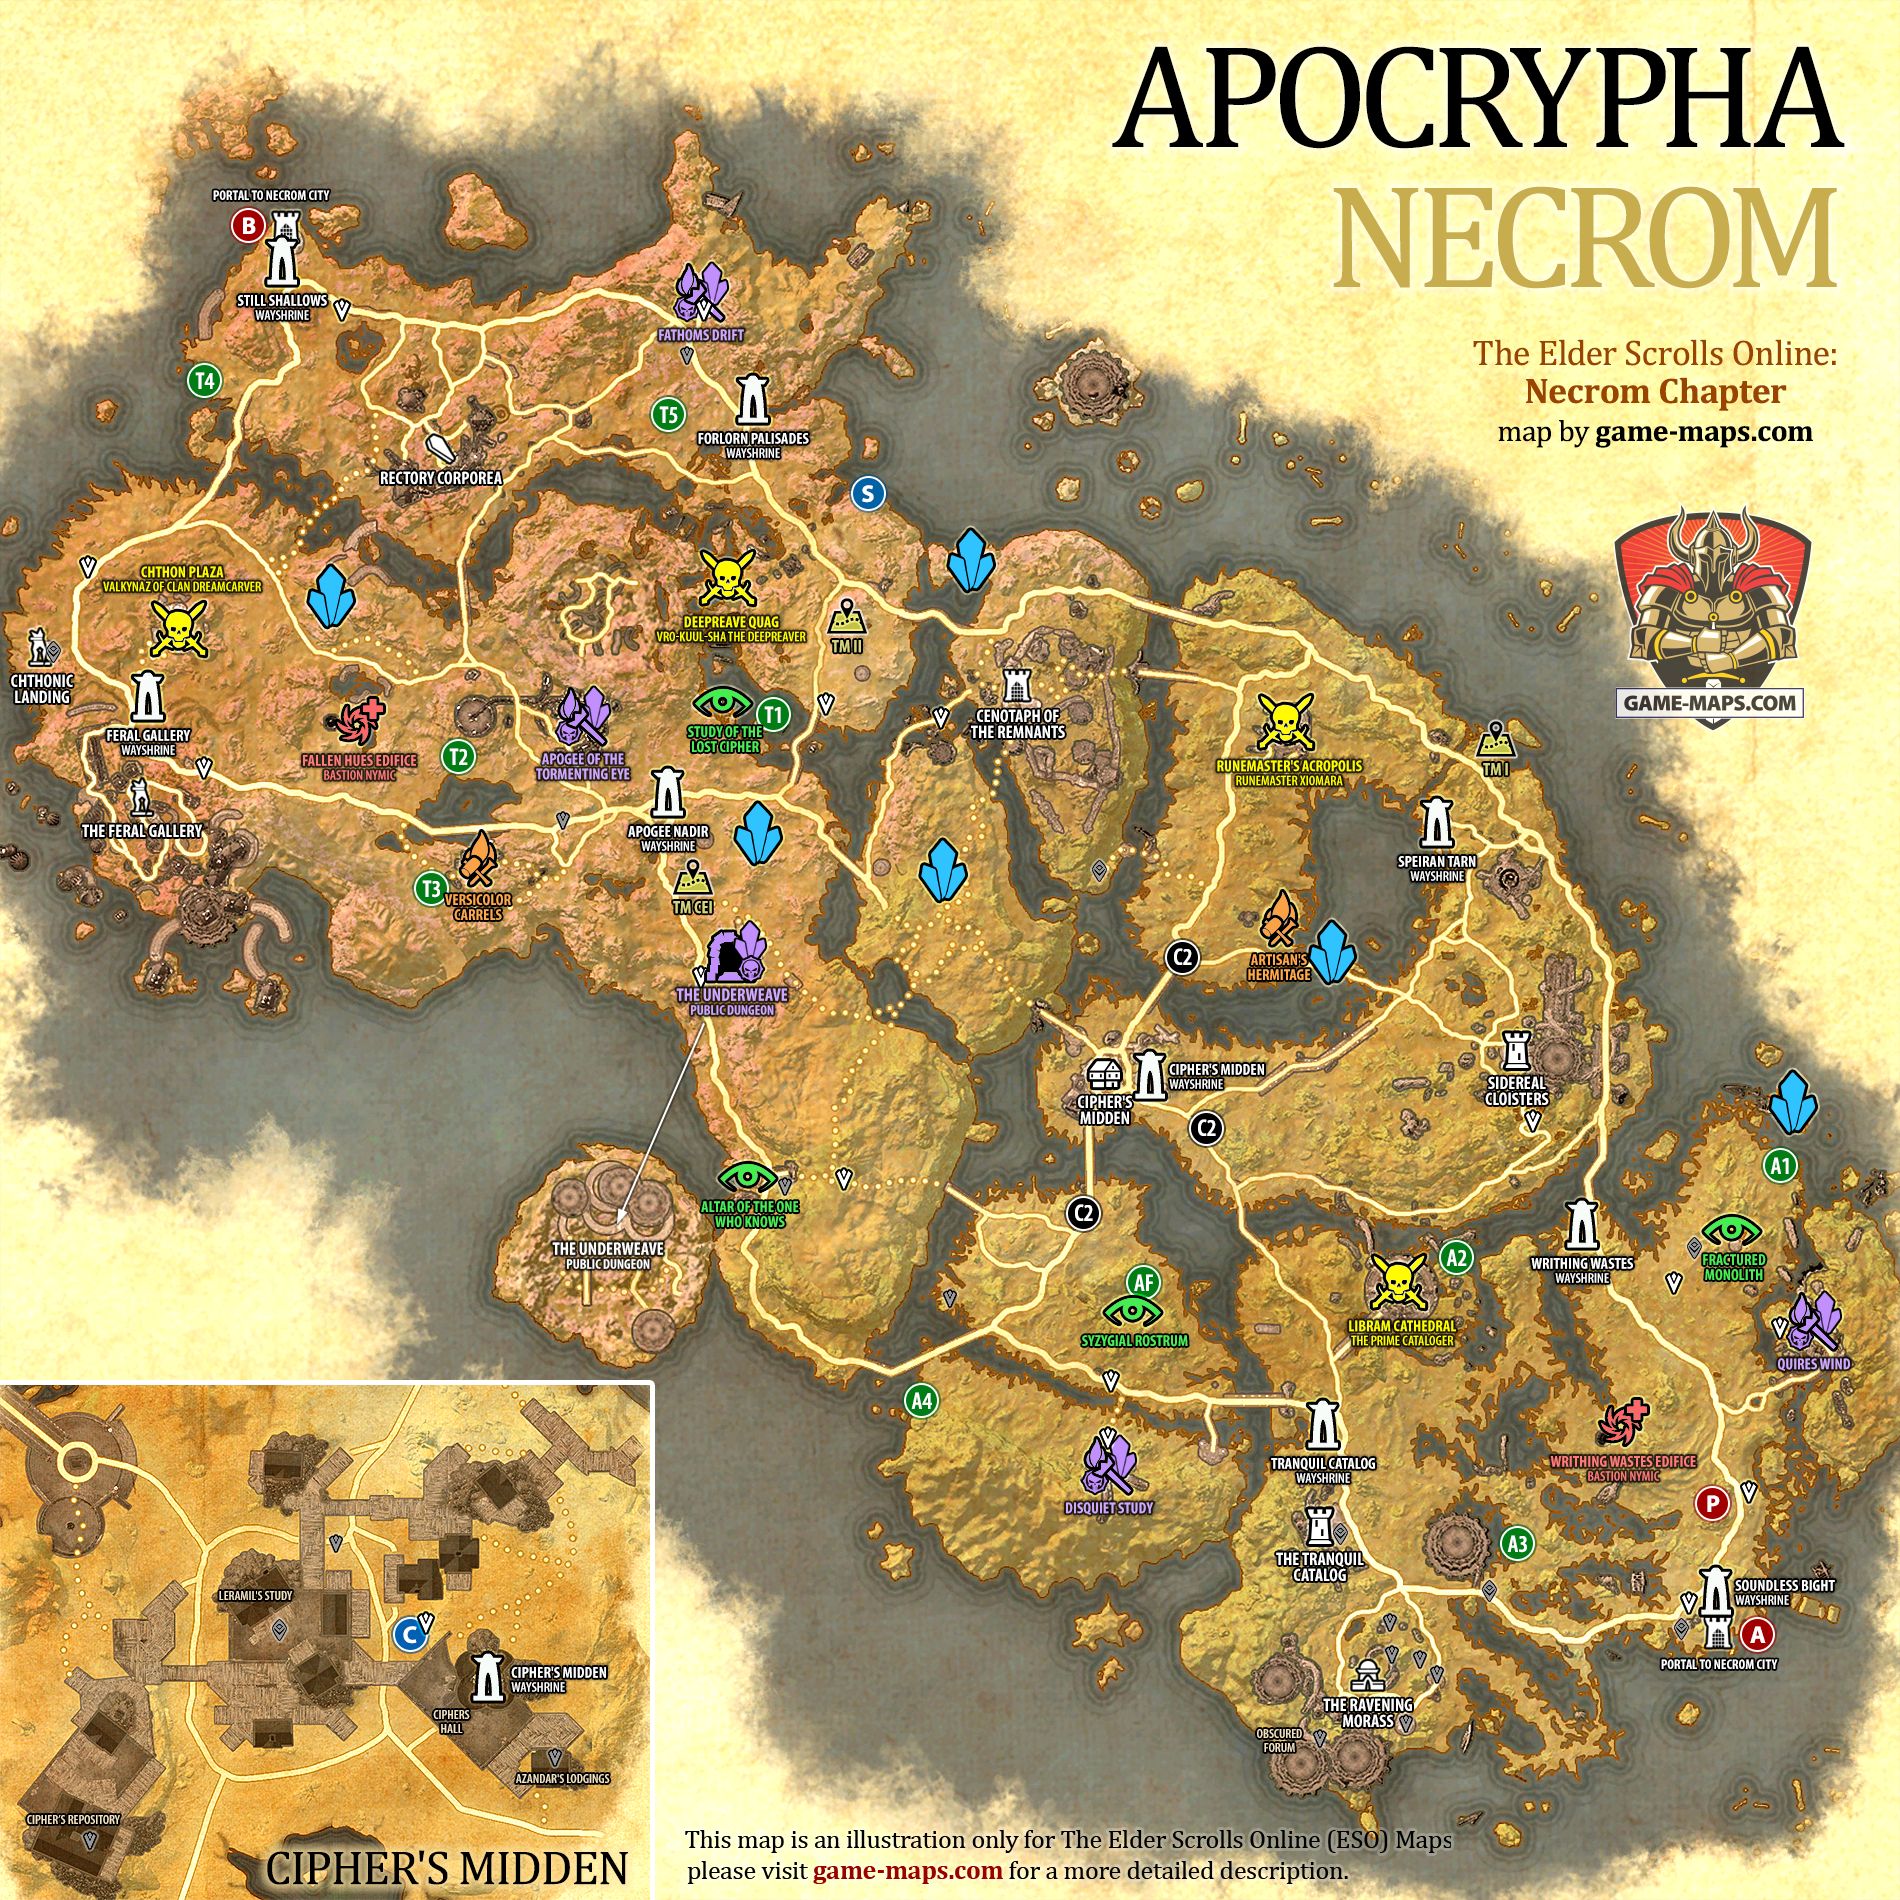 Apocrypha Map for The Elder Scrolls Online: Necrom Chapter, The Shadow Over Morrowind 2023 Adventure (ESO).